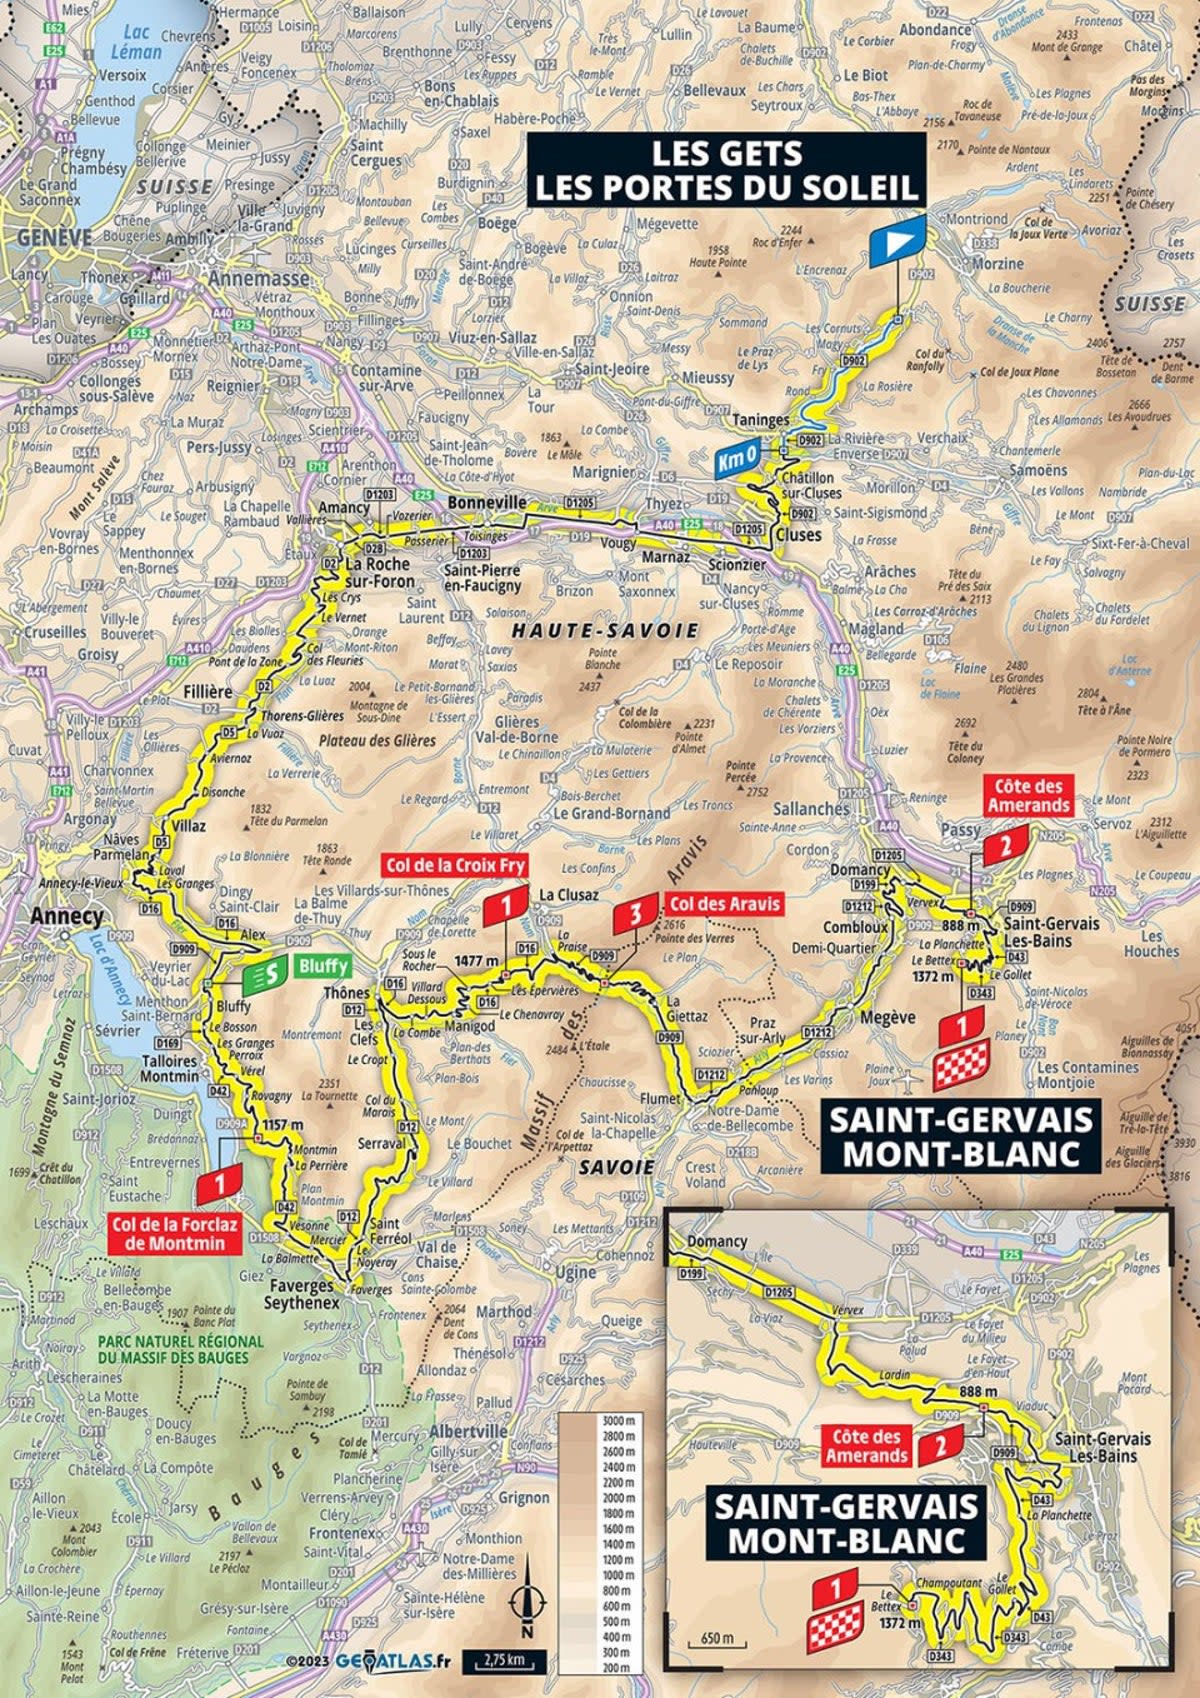 Stage 15 map (letour)